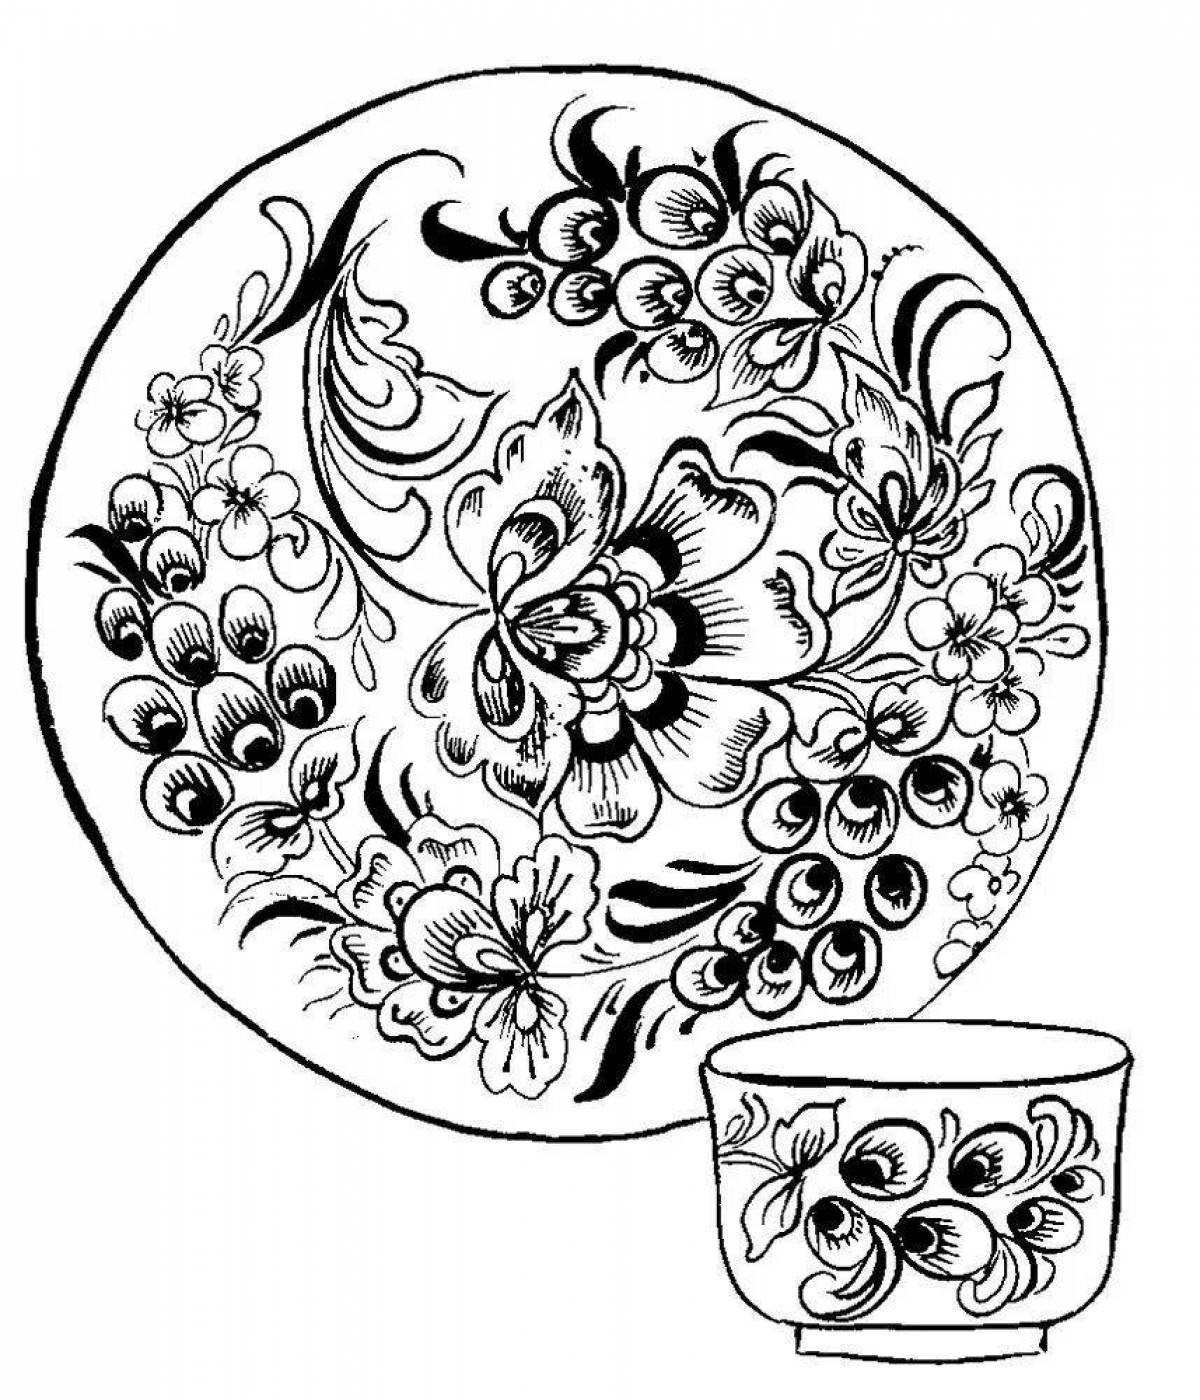 Coloring page delightful gzhel tray